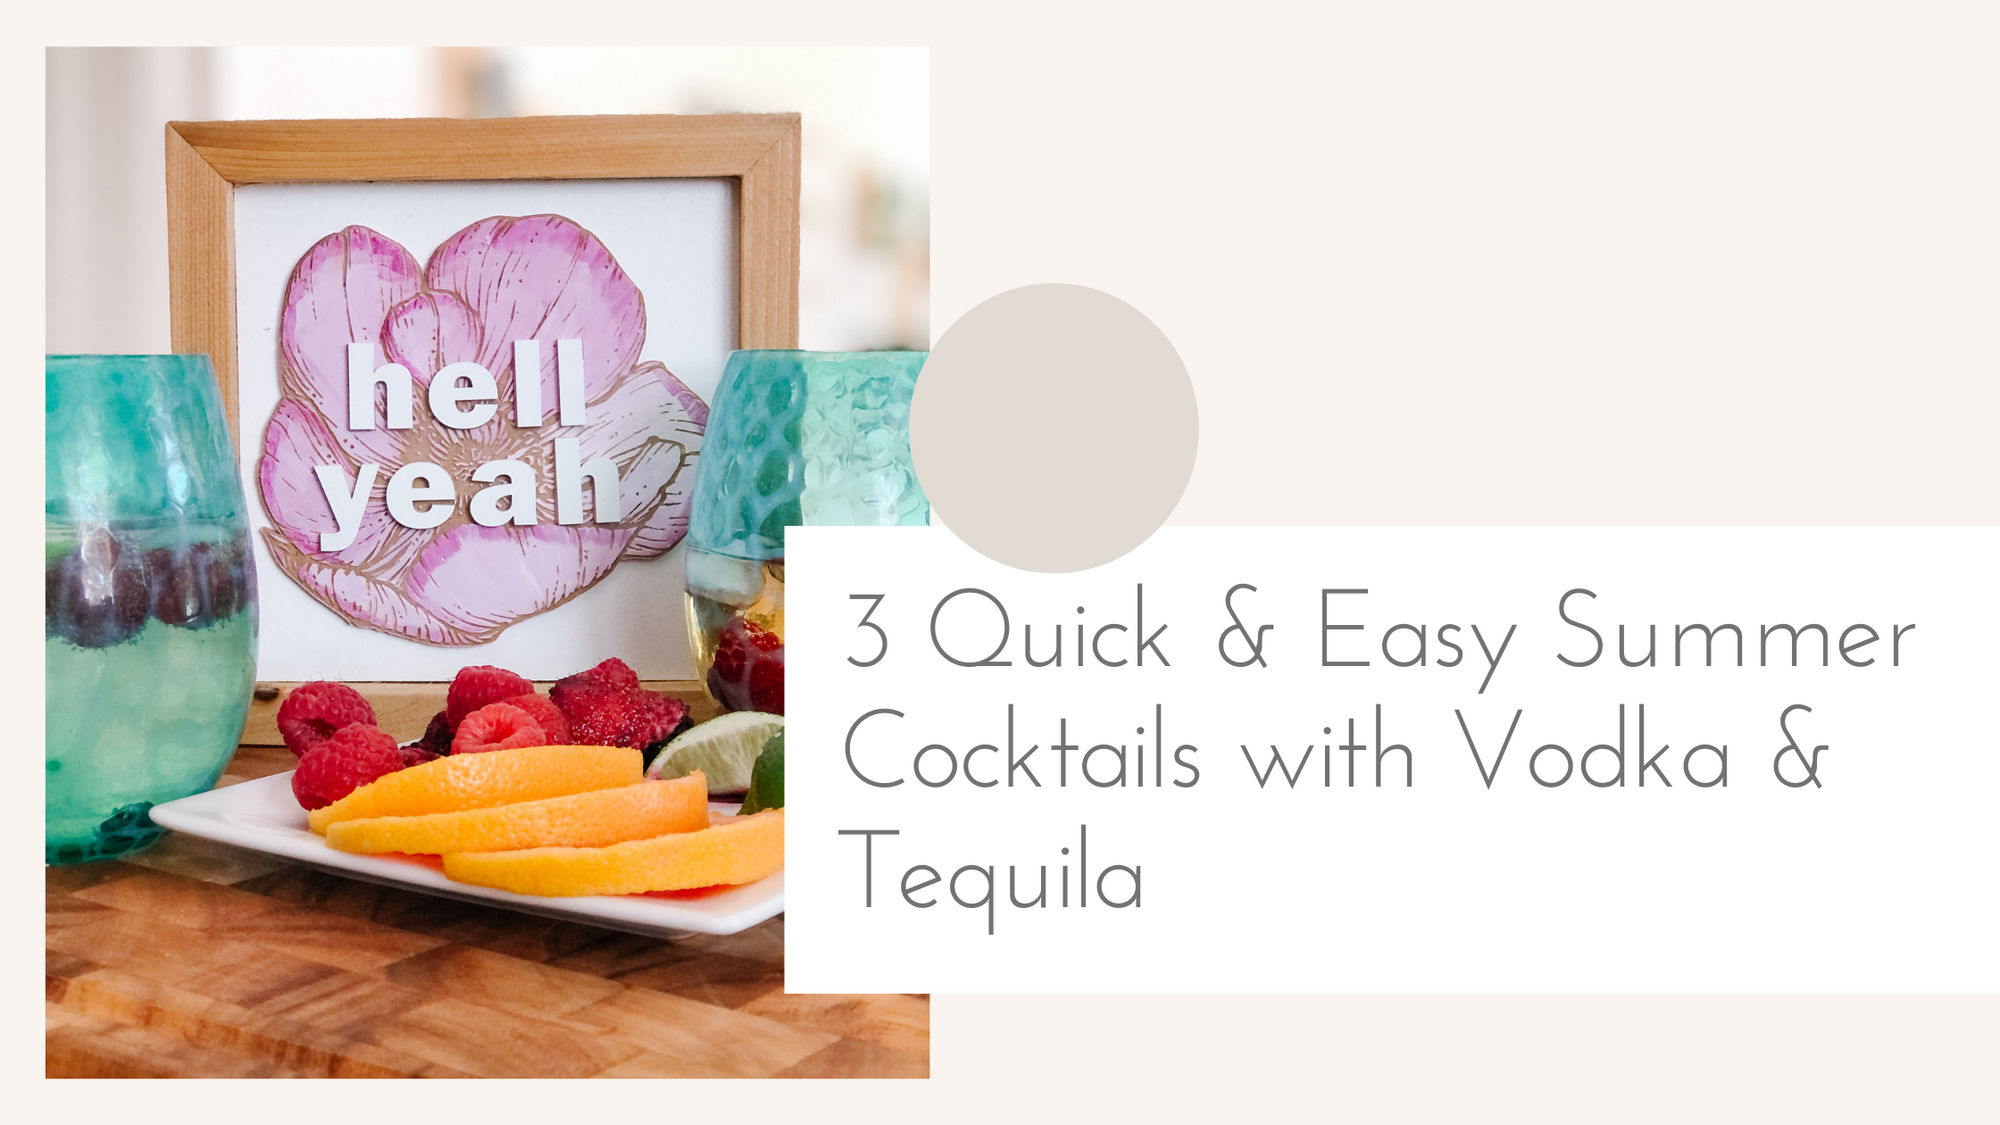 3 Quick & Easy Summer Cocktails with Vodka & Tequila– No Grocery Store Required